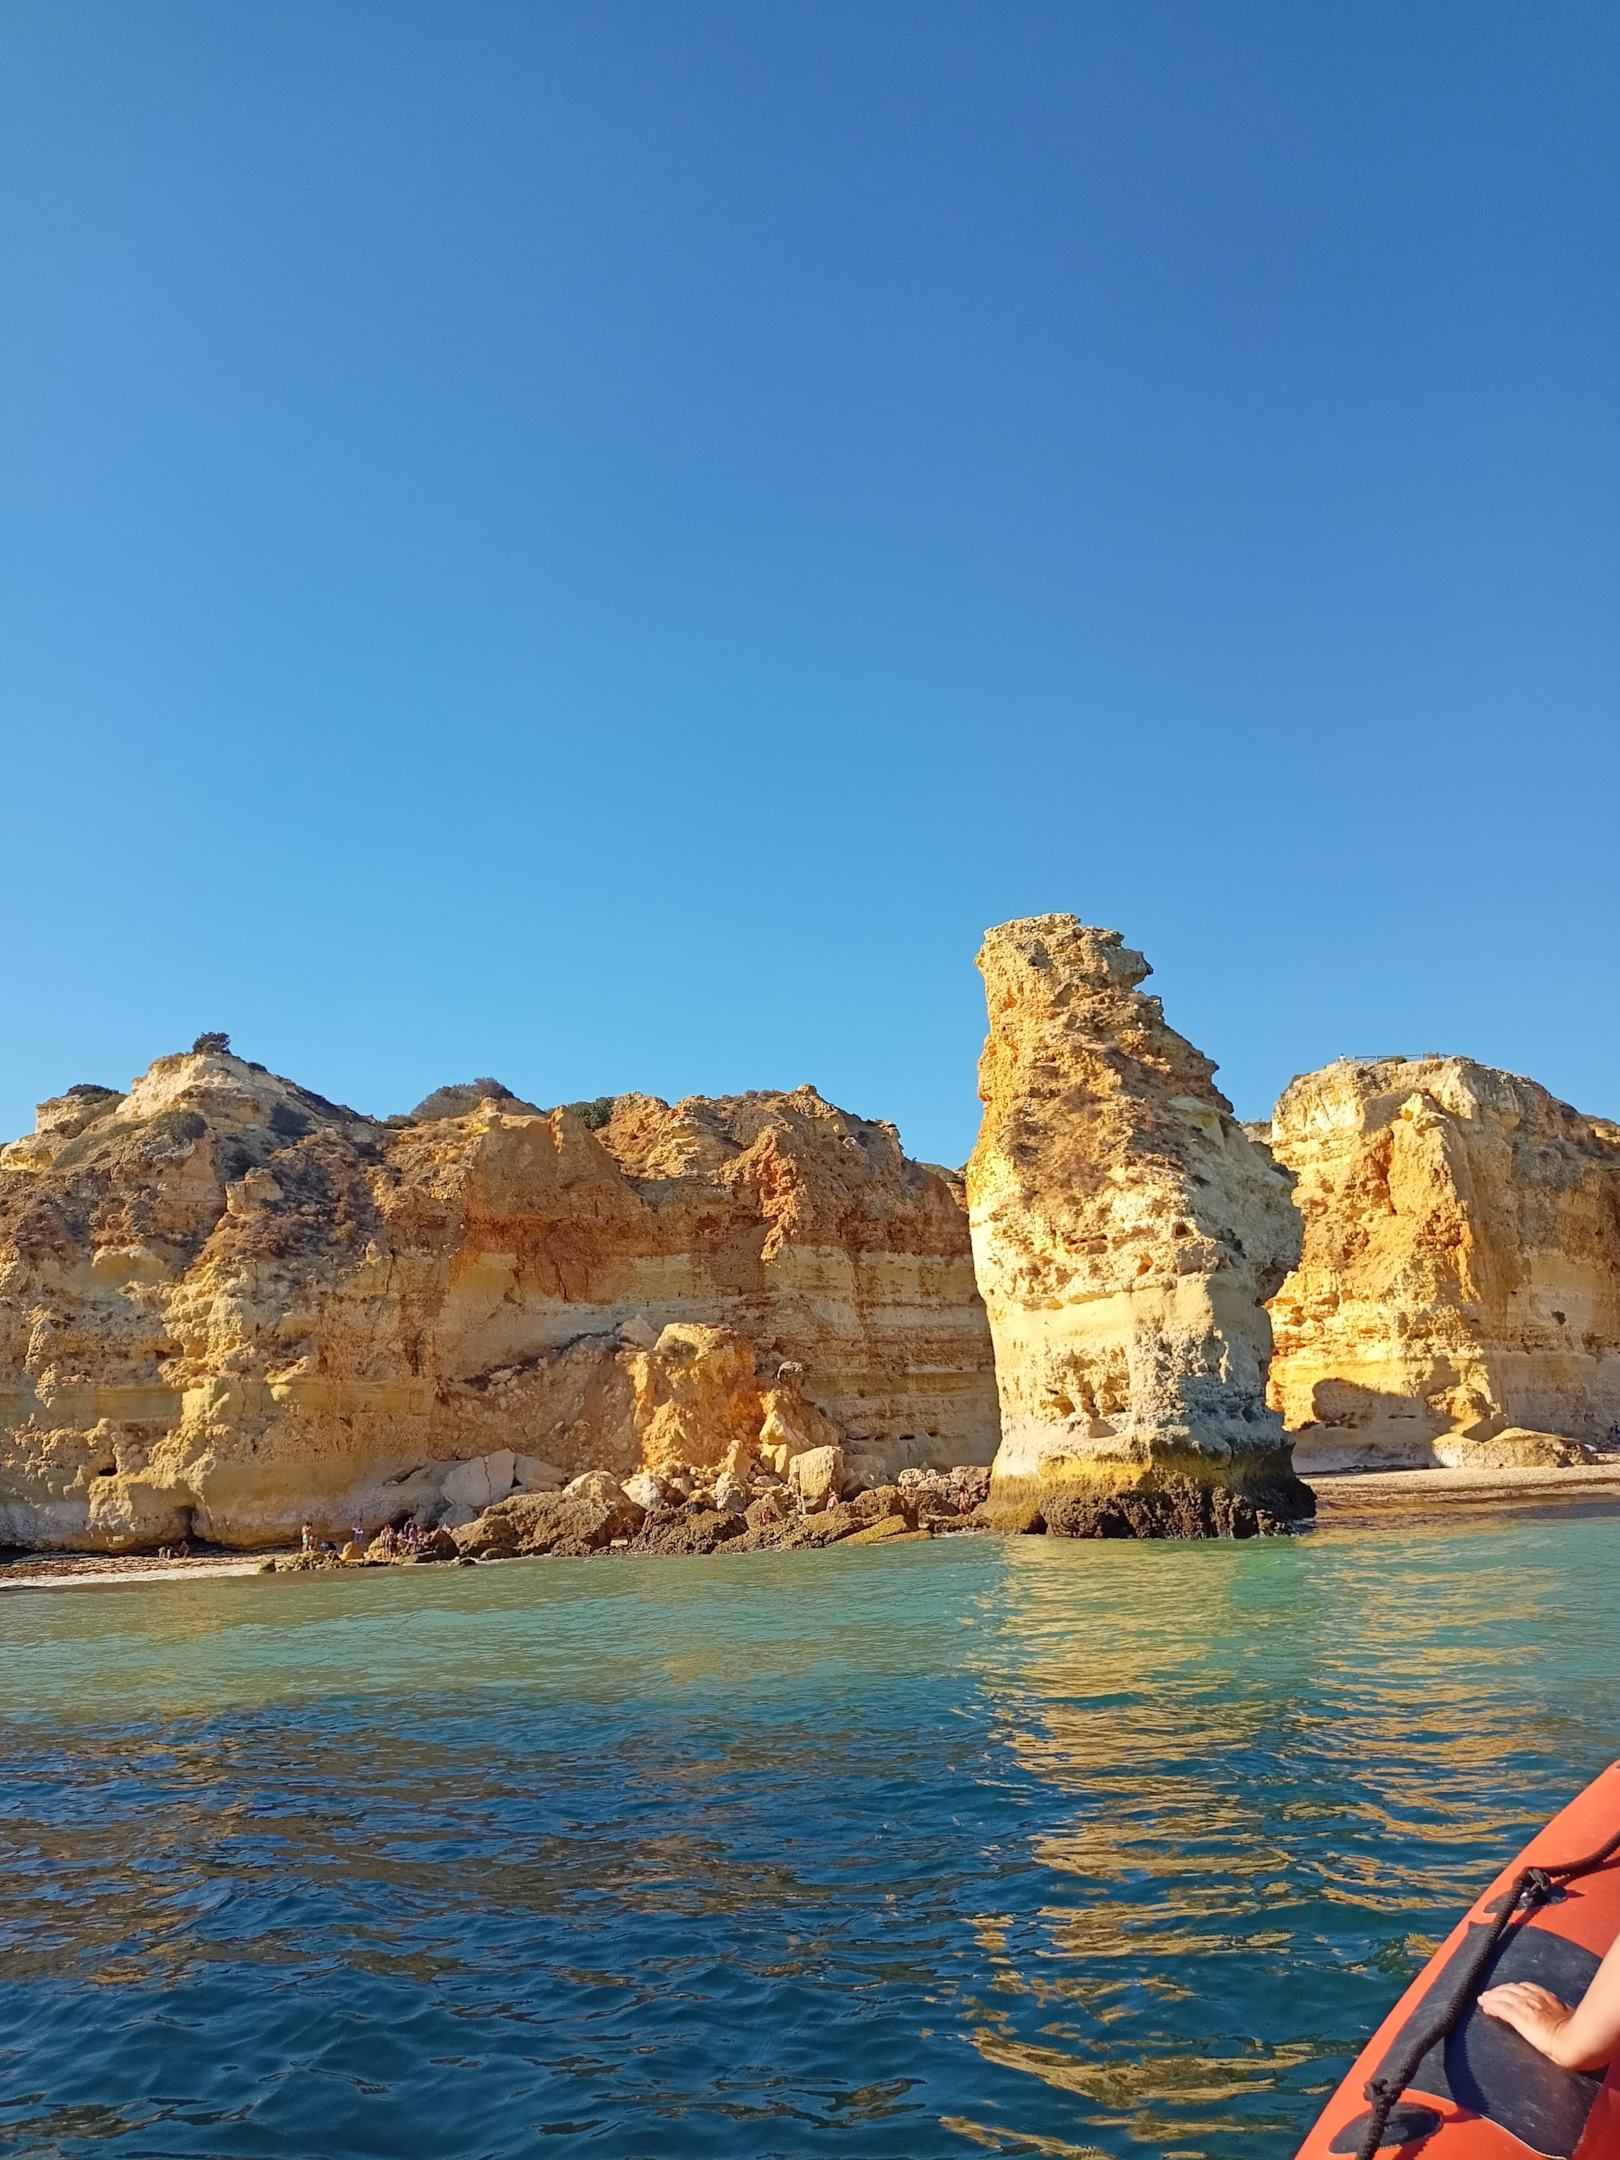 Geography of the Algarve: All You Need to Know